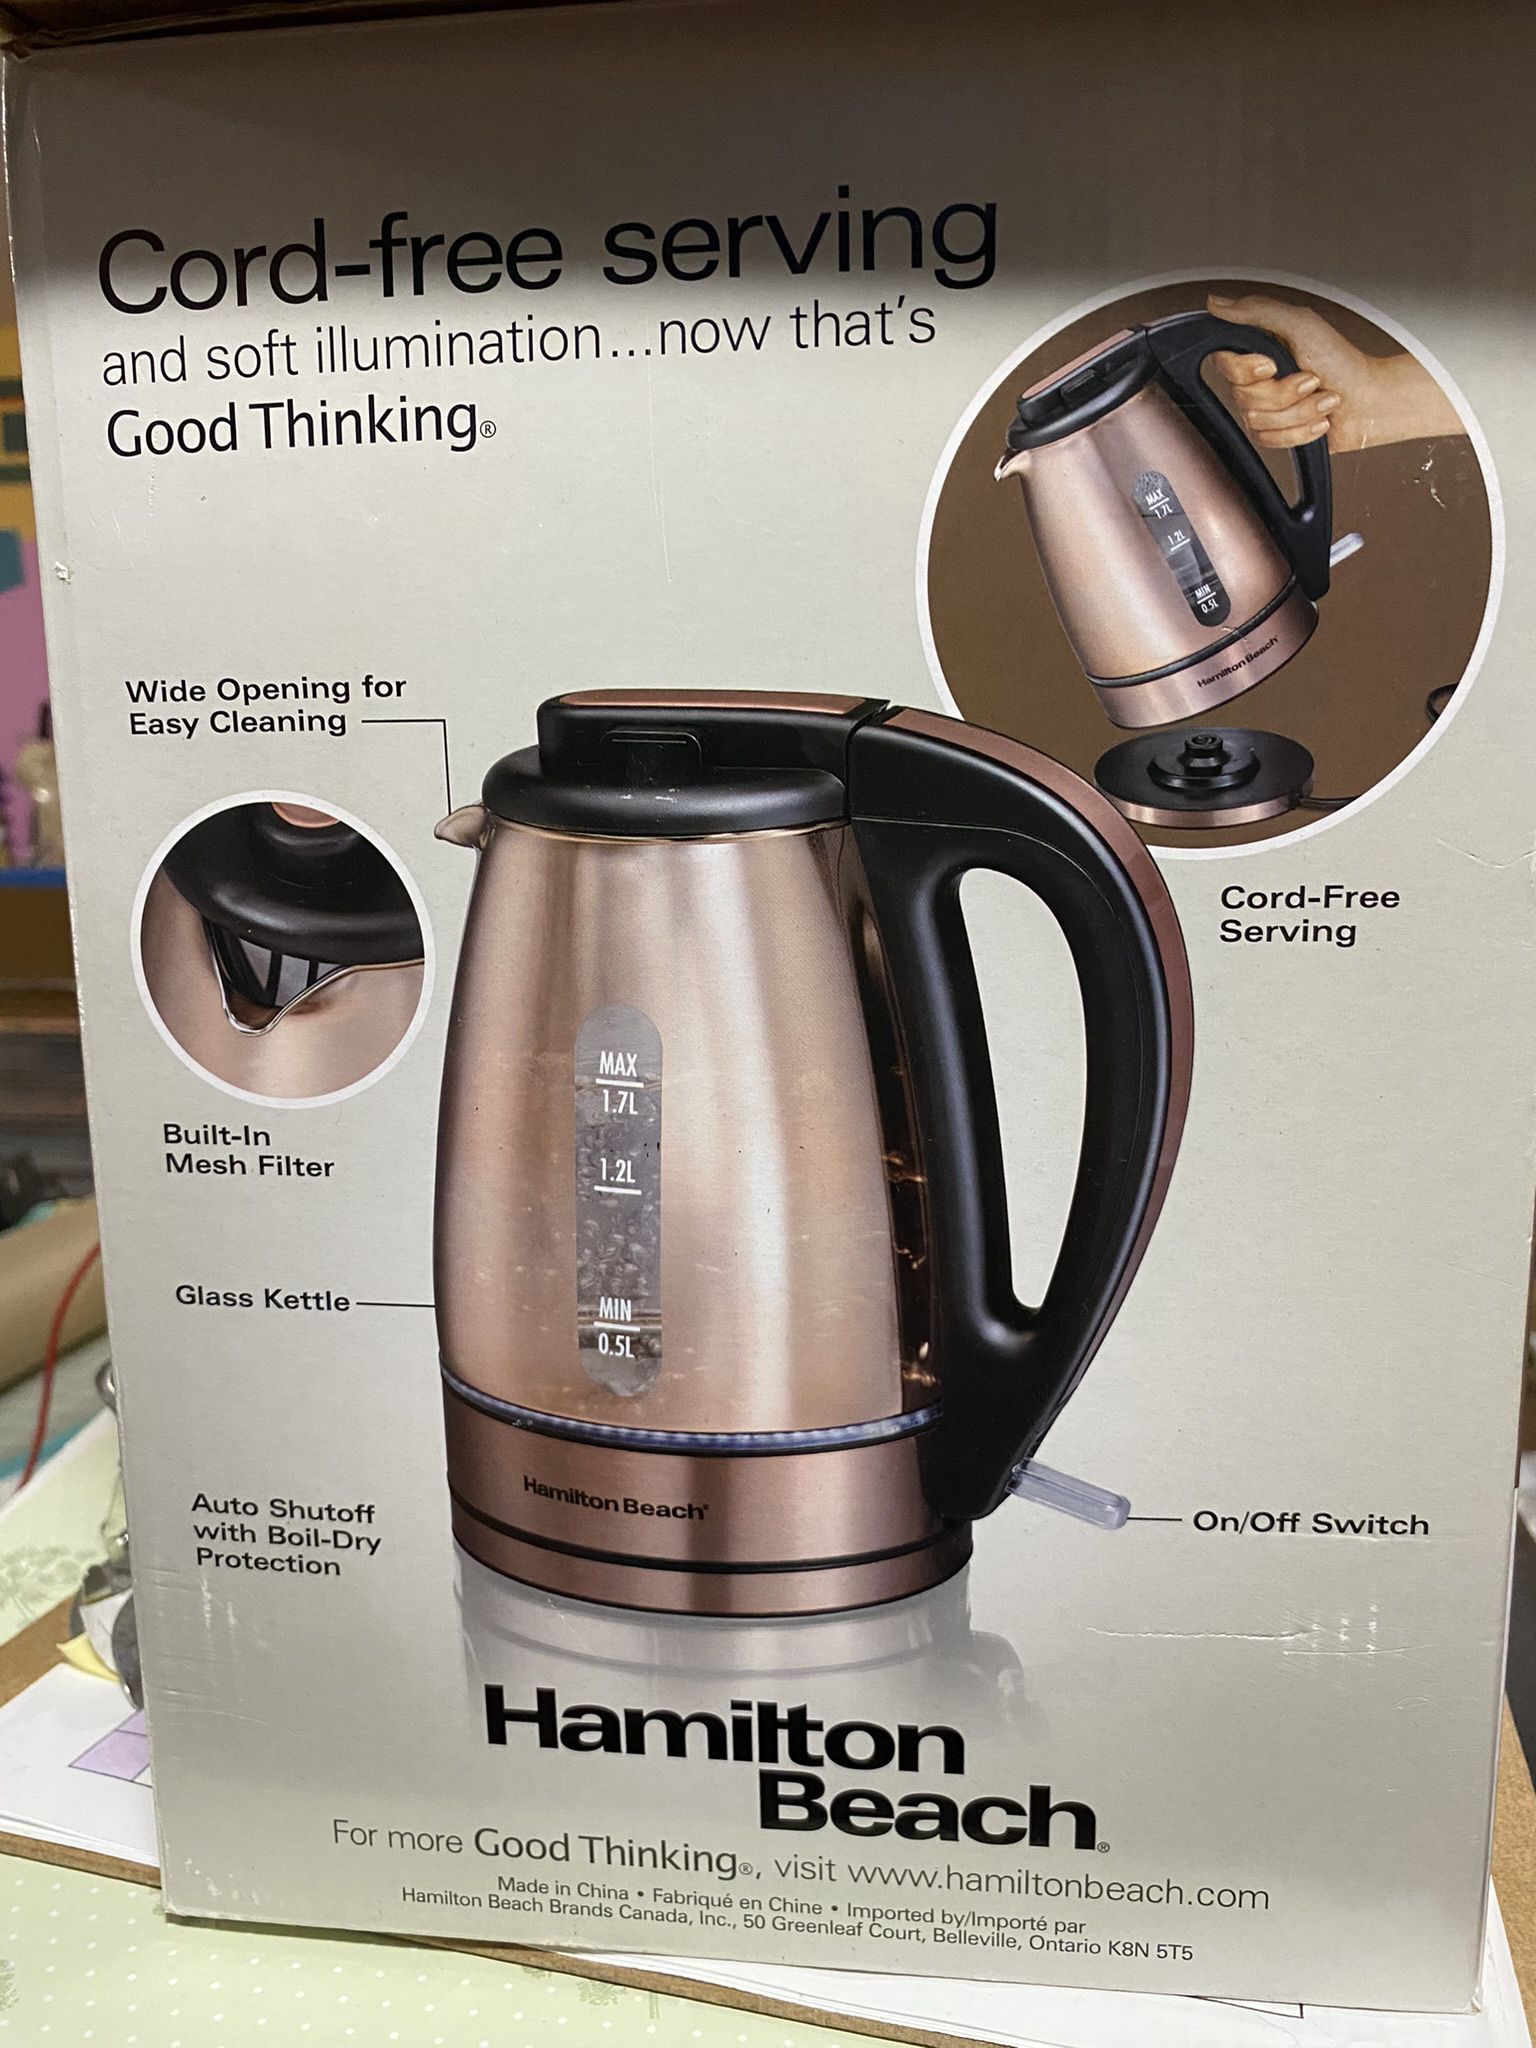 KRUPS, Electric Kettle with adjustable temperature, Stainless Steel  BW314050 for Sale in Cincinnati, OH - OfferUp